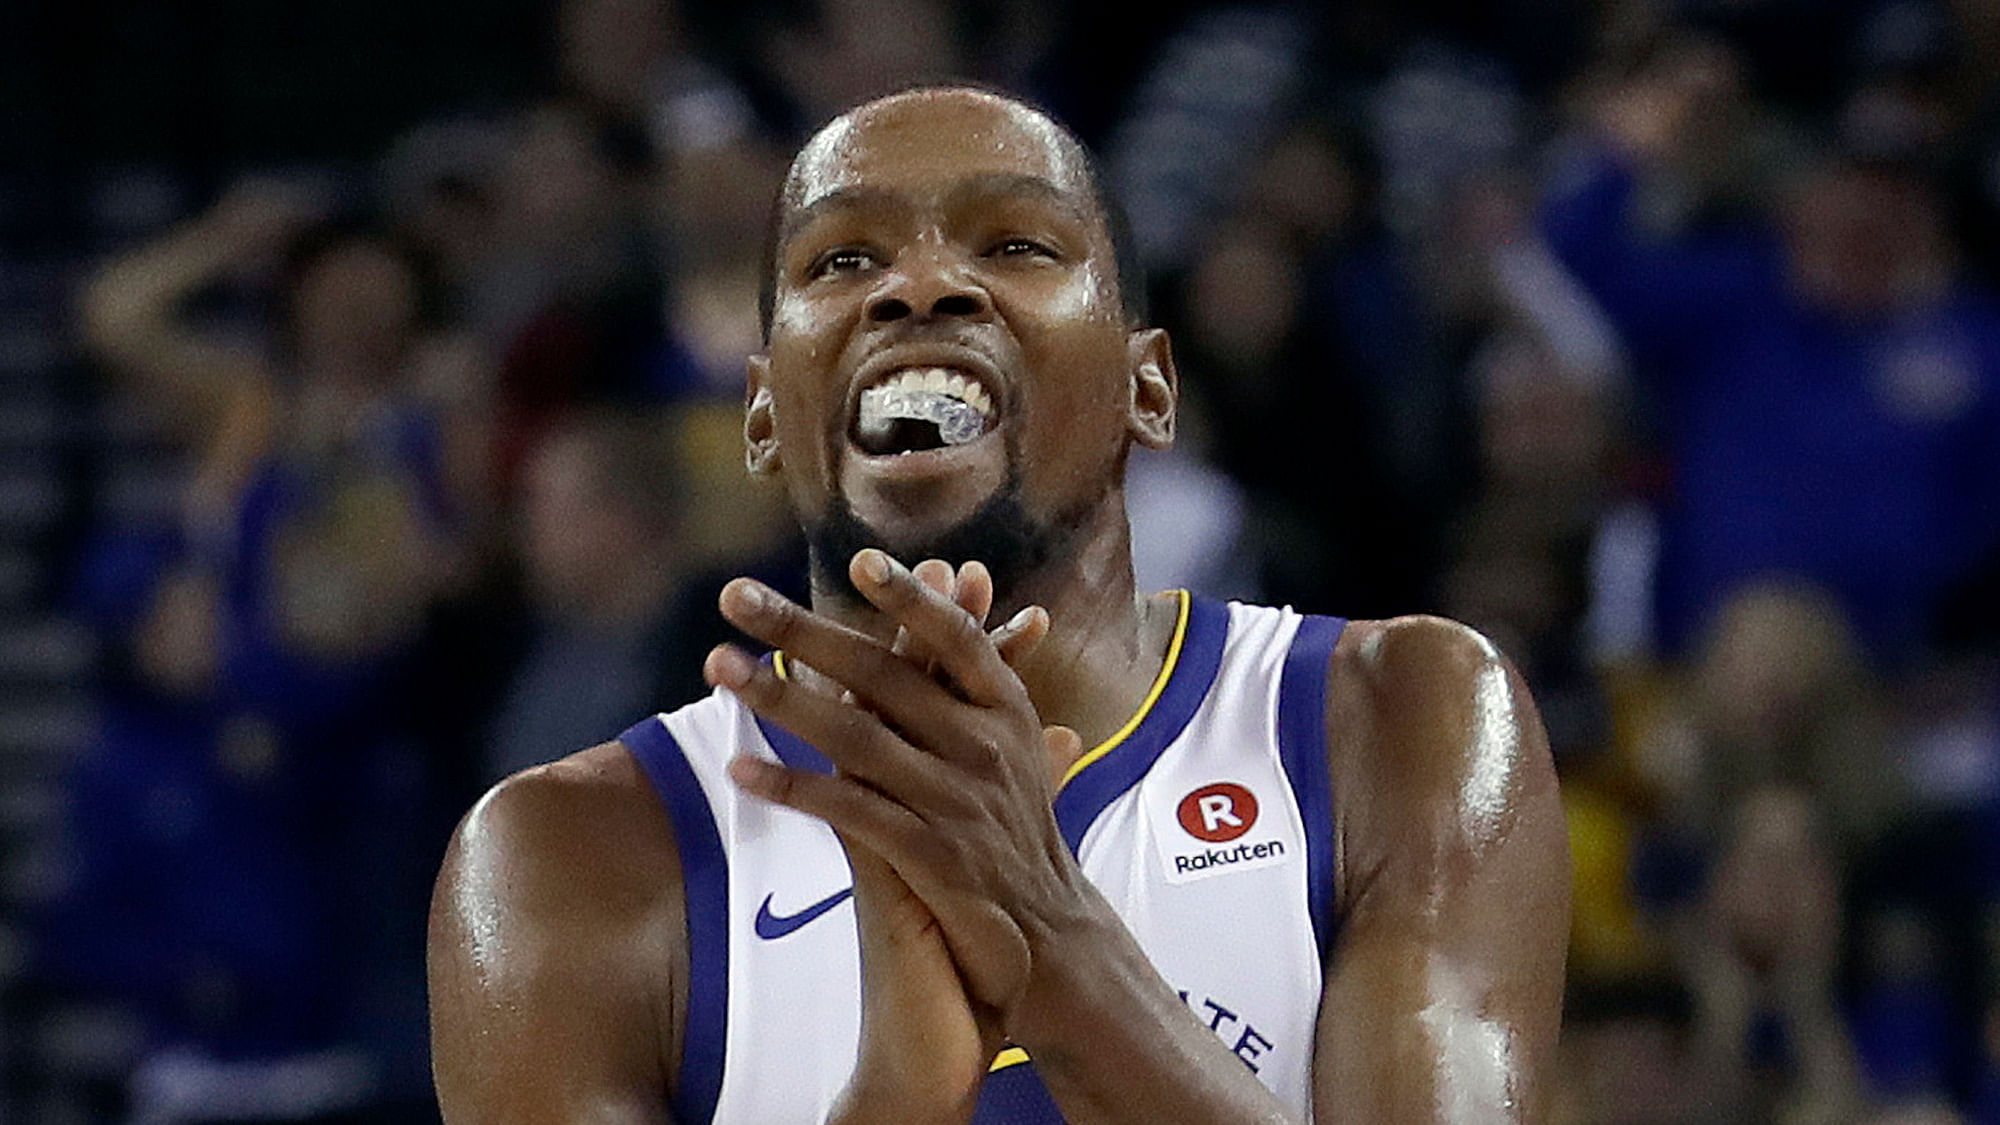 Golden State Warriors forward Kevin Durant <span style="background-color: rgb(255, 255, 255); white-space: pre-wrap;">became the 44th player in NBA history to score 20,000 career points Wednesday night.</span>